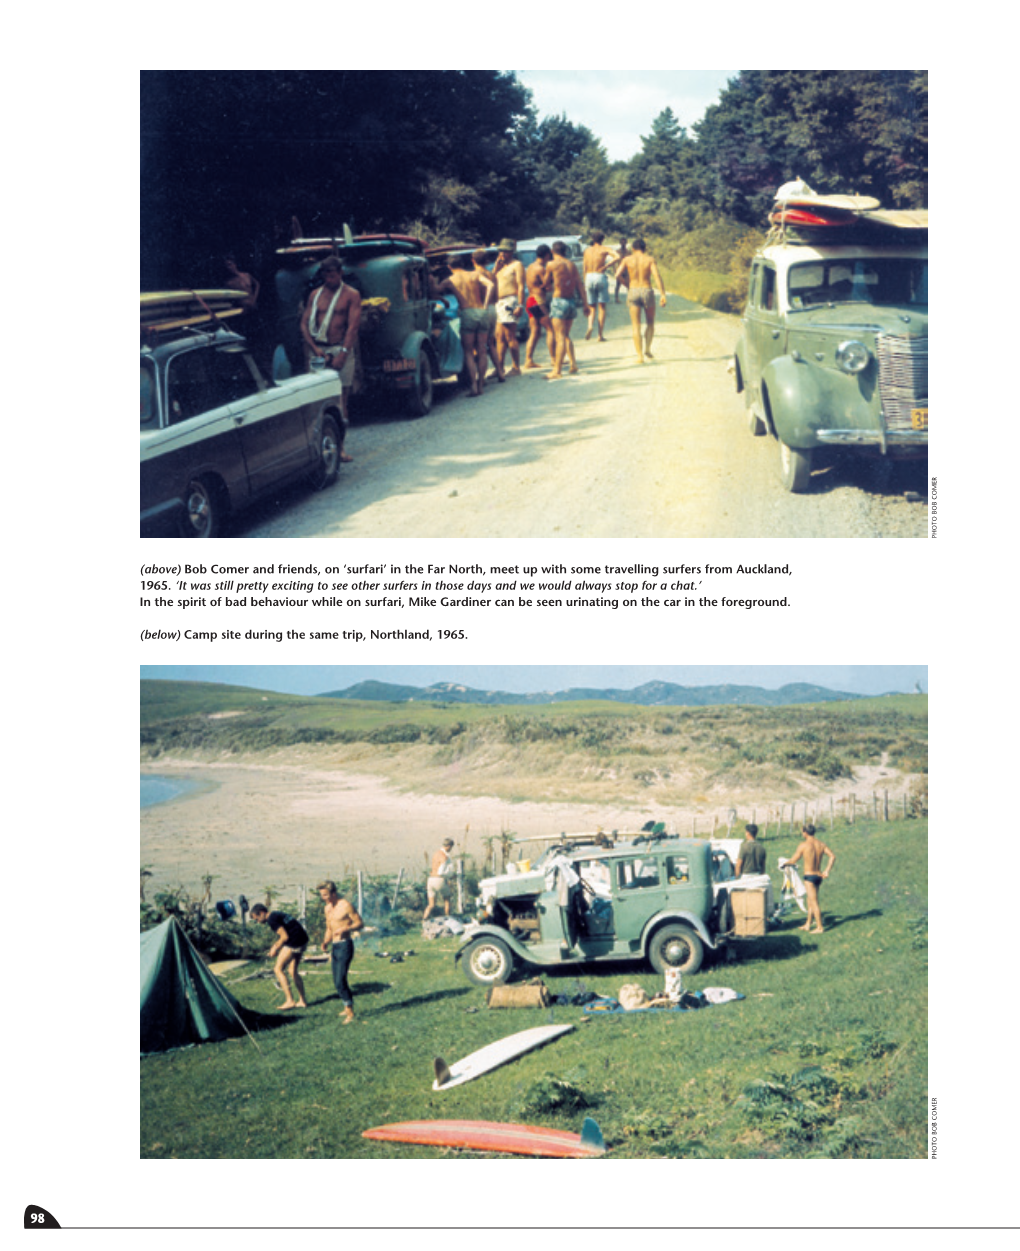 In the Far North, Meet up with Some Travelling Surfers from Auckland, 1965